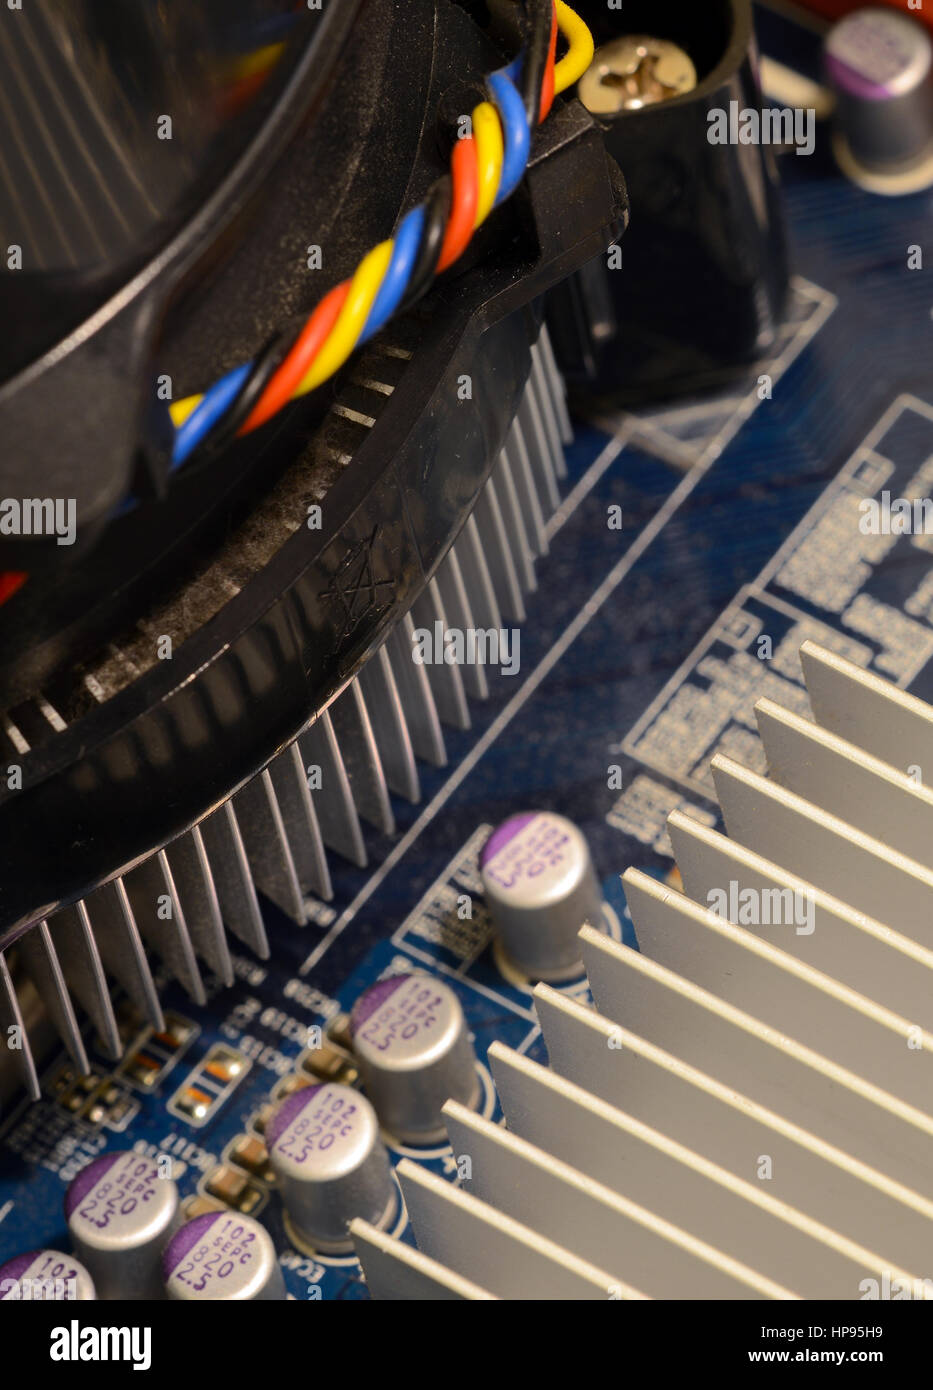 Close up of printed circuits on motherboard, the backbone of center of electrical connectivity for computer hardware and microcomputer systems includi Stock Photo